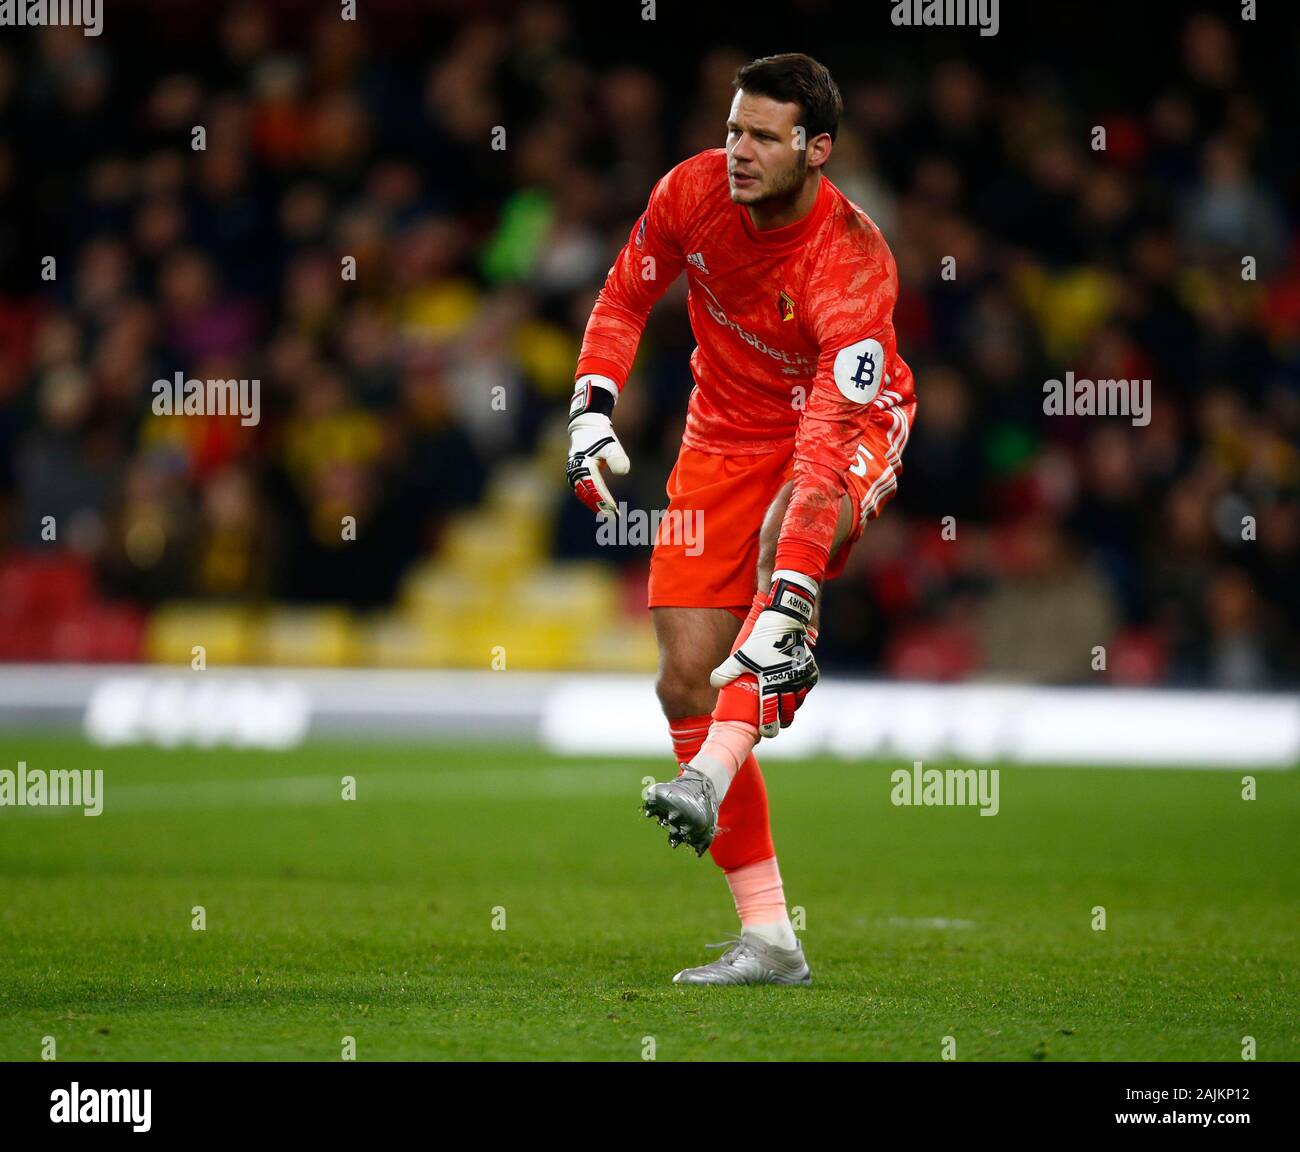 Watford, UK. 04th Jan, 2020. WATFORD, ENGLAND - JANUARY 04: Watford's Daniel Bachmann during Emirates FA Cup Third Round match between Watford and Tranmere Rovers on January 04 2020 at Vicarage Road Stadium, Watford, England. Credit: Action Foto Sport/Alamy Live News Stock Photo